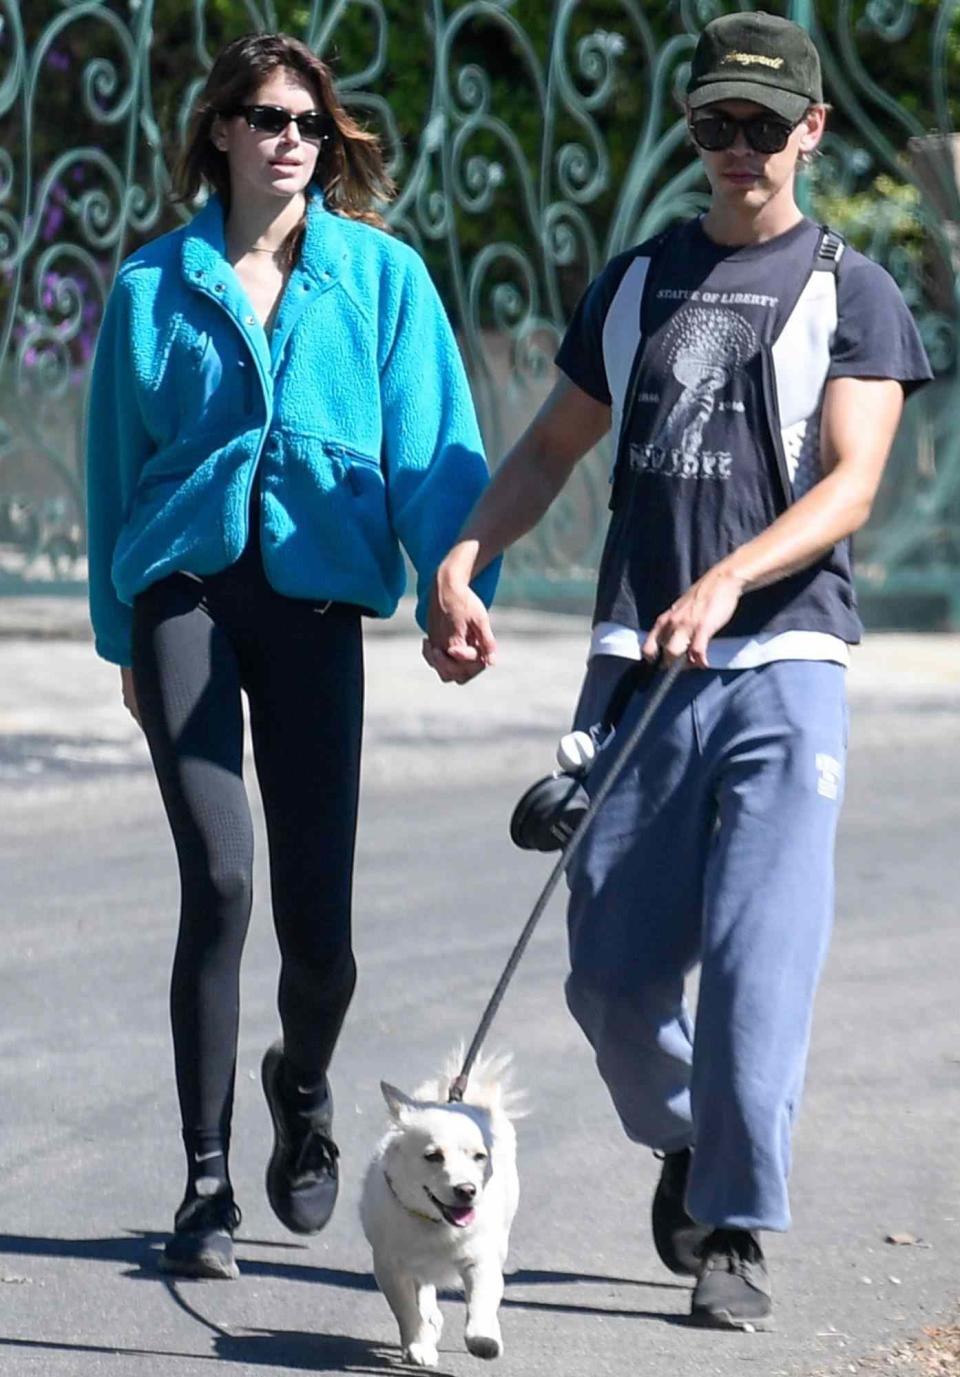 *EXCLUSIVE* Kaia Gerber and Austin Butler go on a romantic hike